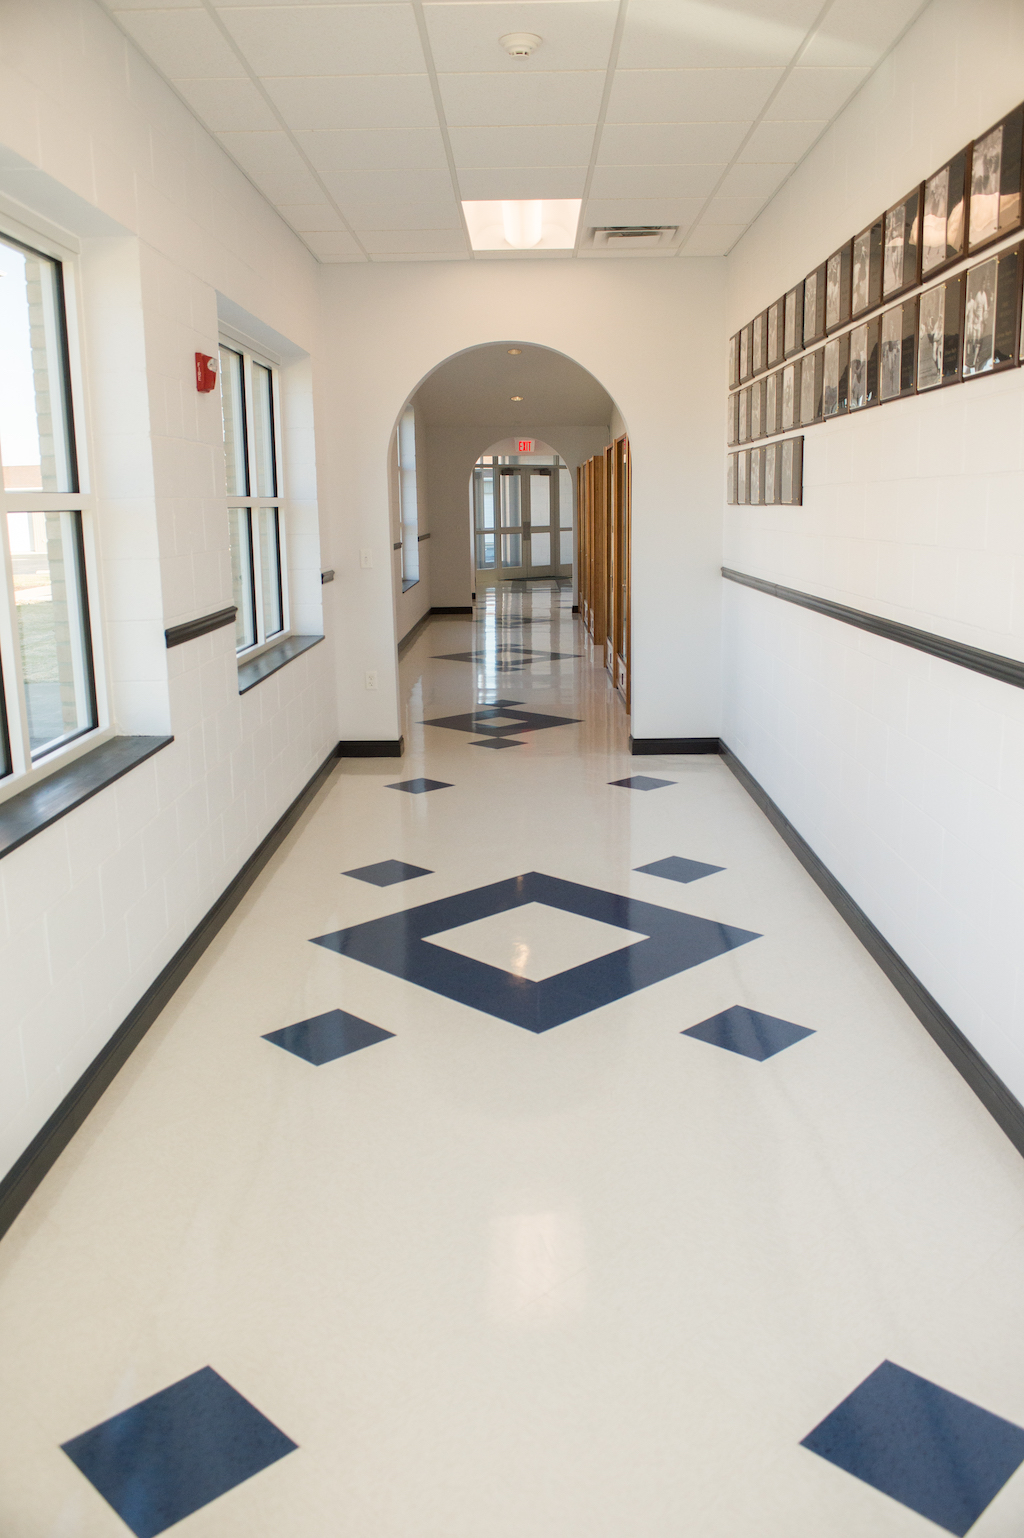 Notre Dame Academy, commercial construction build by Keymark Construction